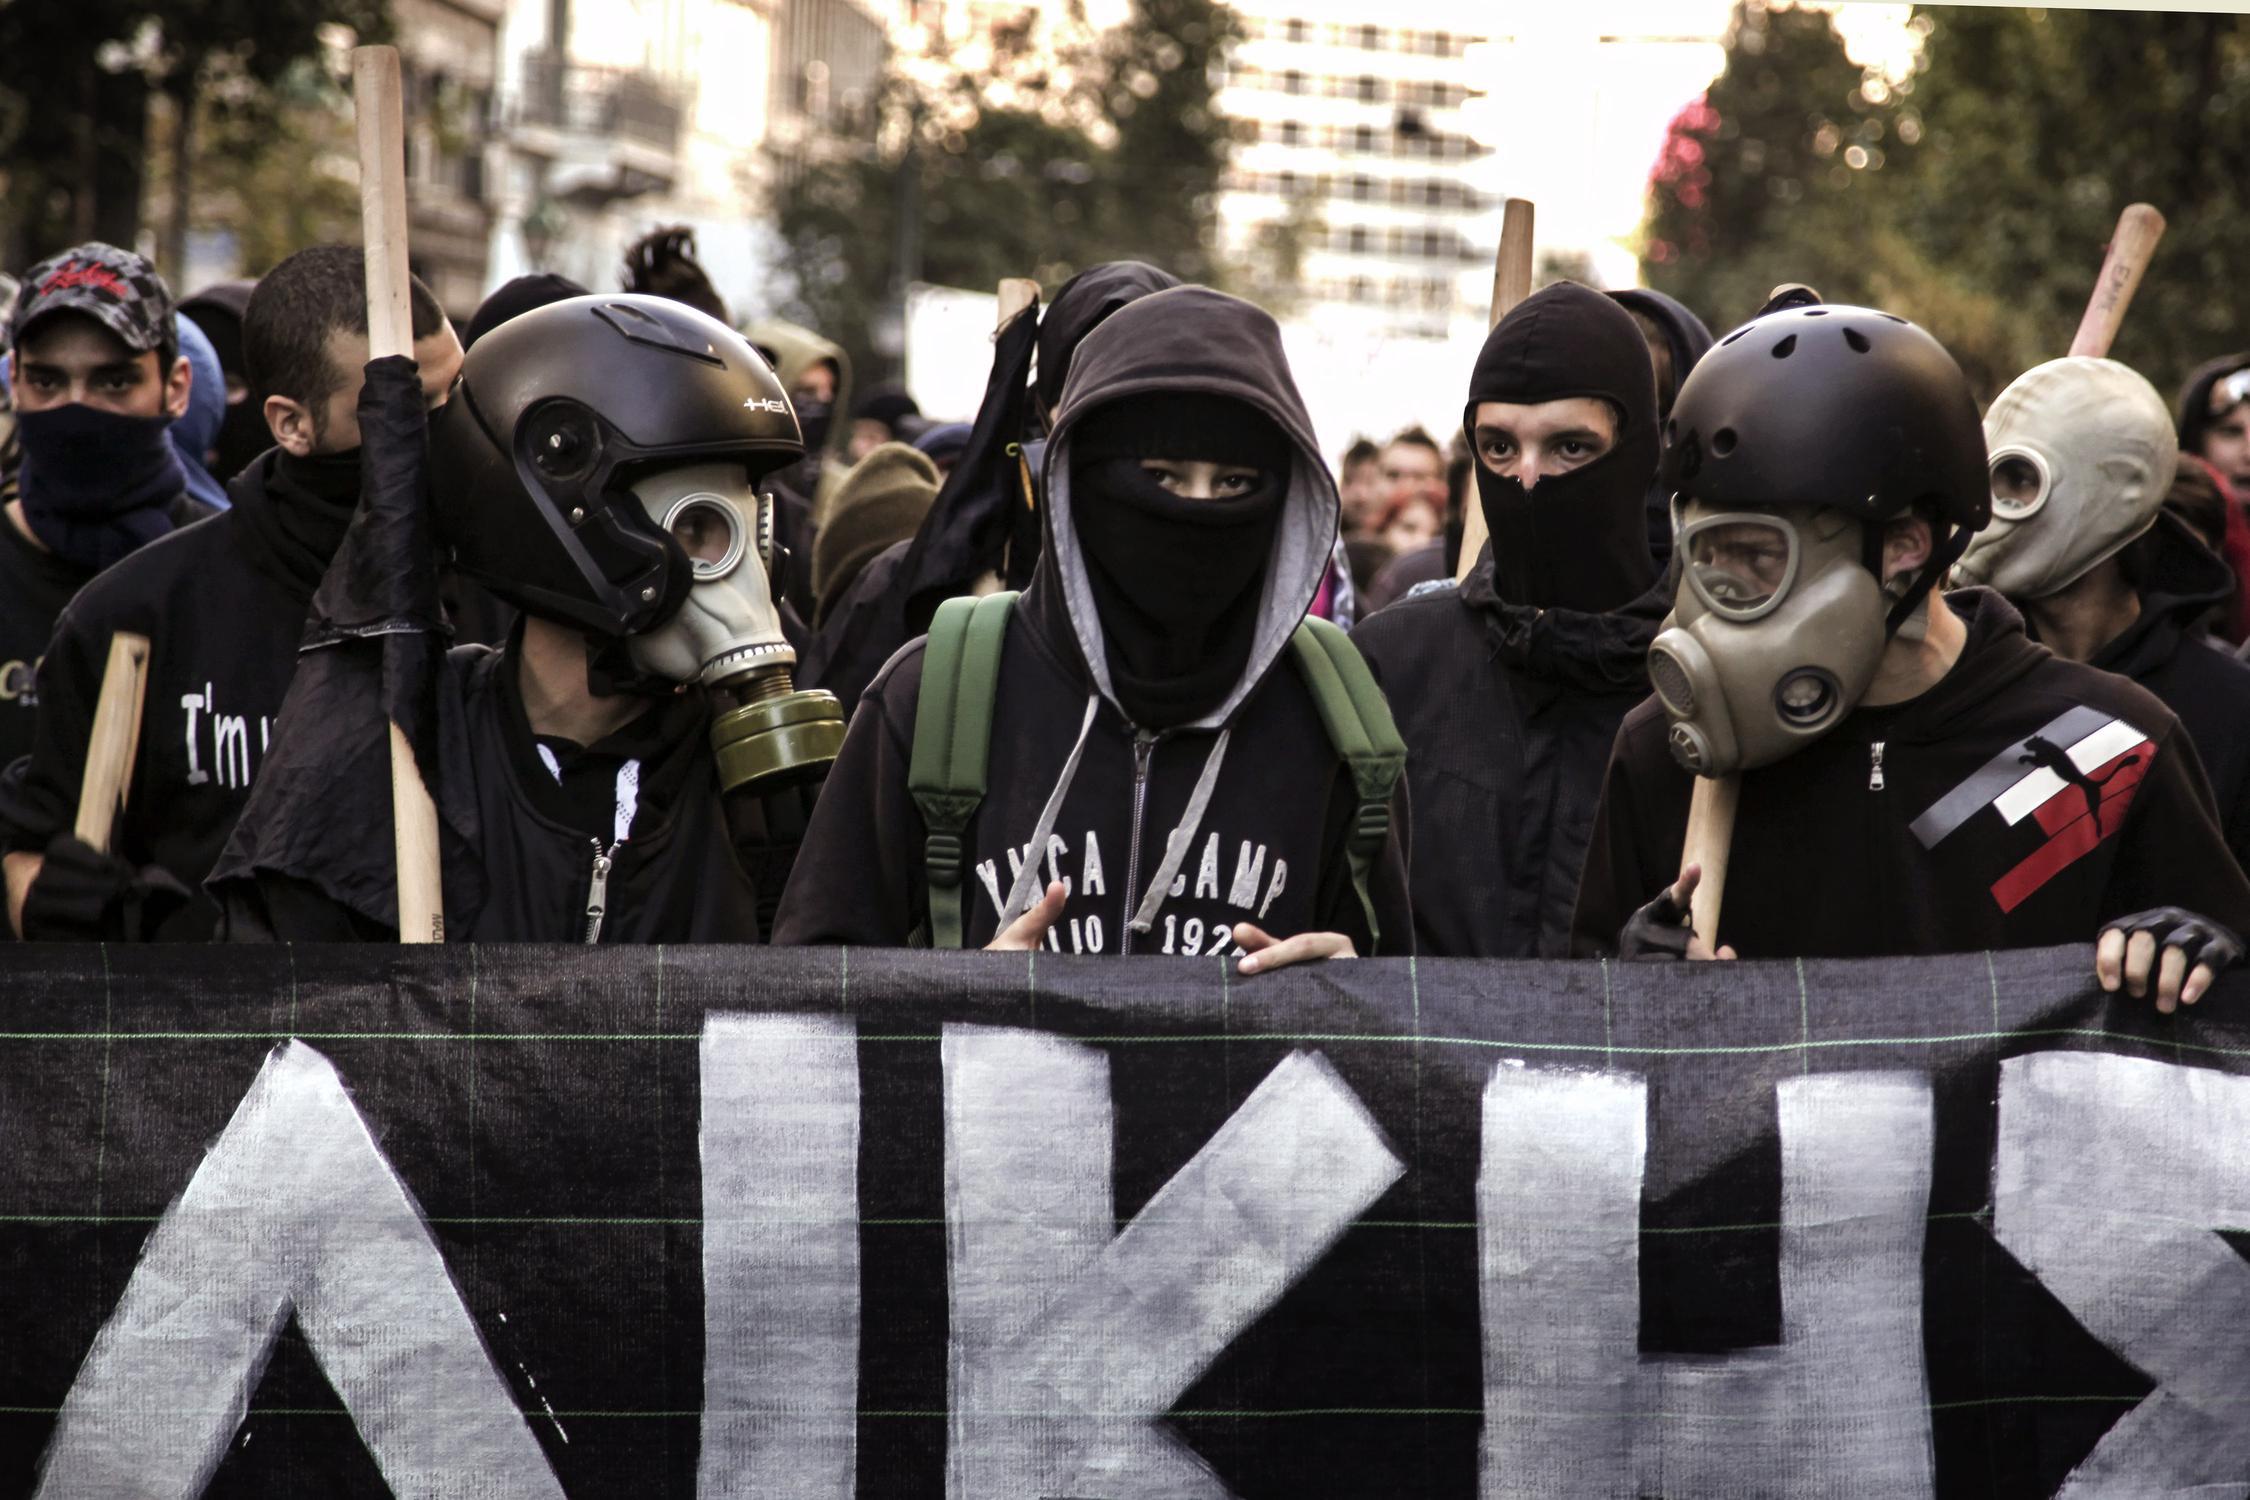 Students protest in memoriam of the six-year anniversary of the murder of Alexis Grigoropoulos by a police officer, in Athens, Dec. 6, 2014 / Πορεία μνήμης μαθητών για τα έξι χρόνια απο την δολοφονία του Αλέξη Γρηγορόπουλου απο αστυνομικό, στην Αθήνα, 6 Δεκεμβρίου, 2014